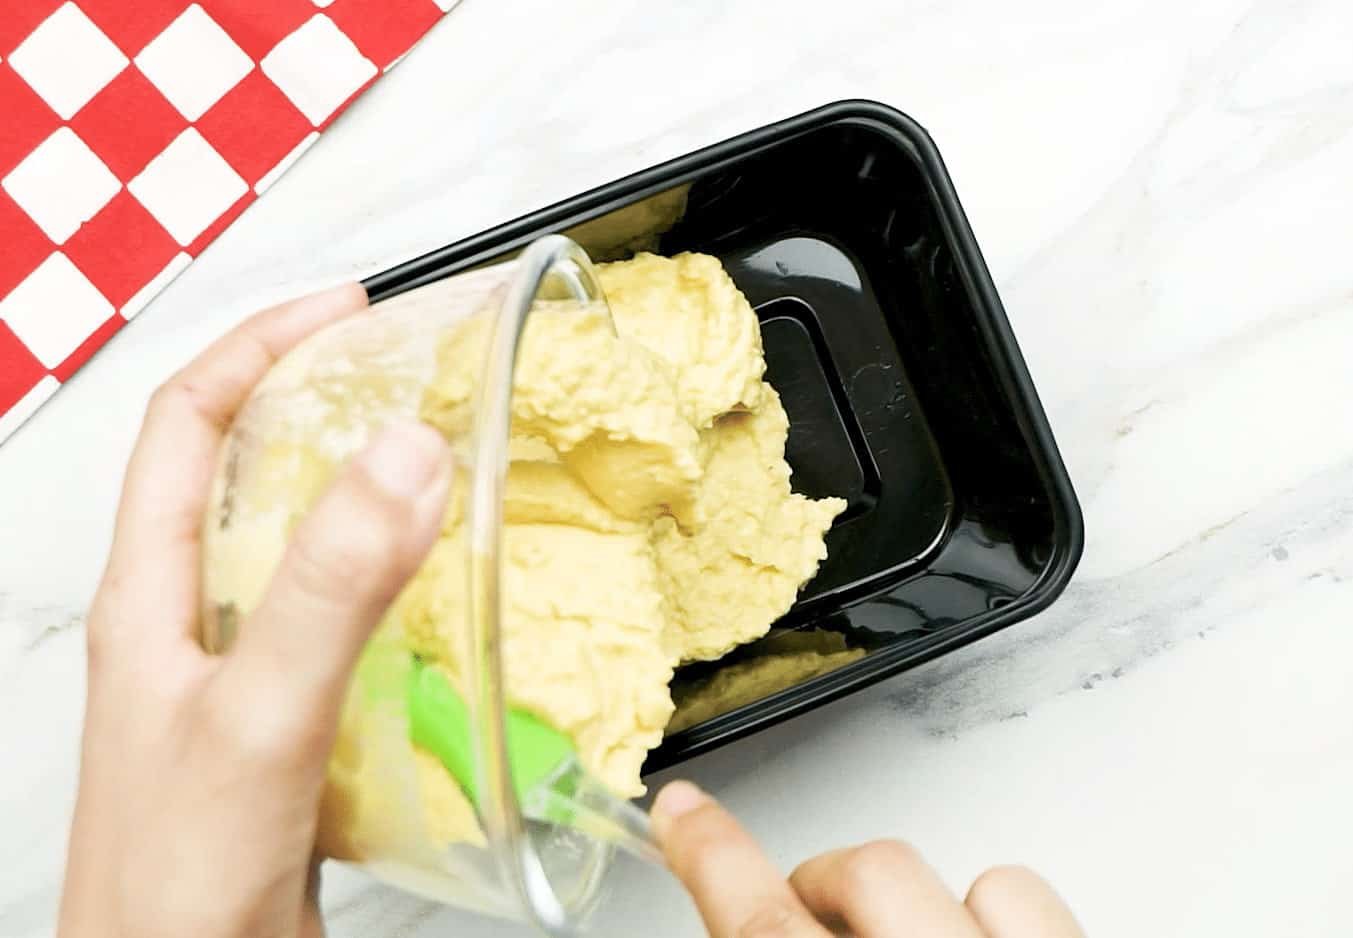 Portion Hummus Into Containers